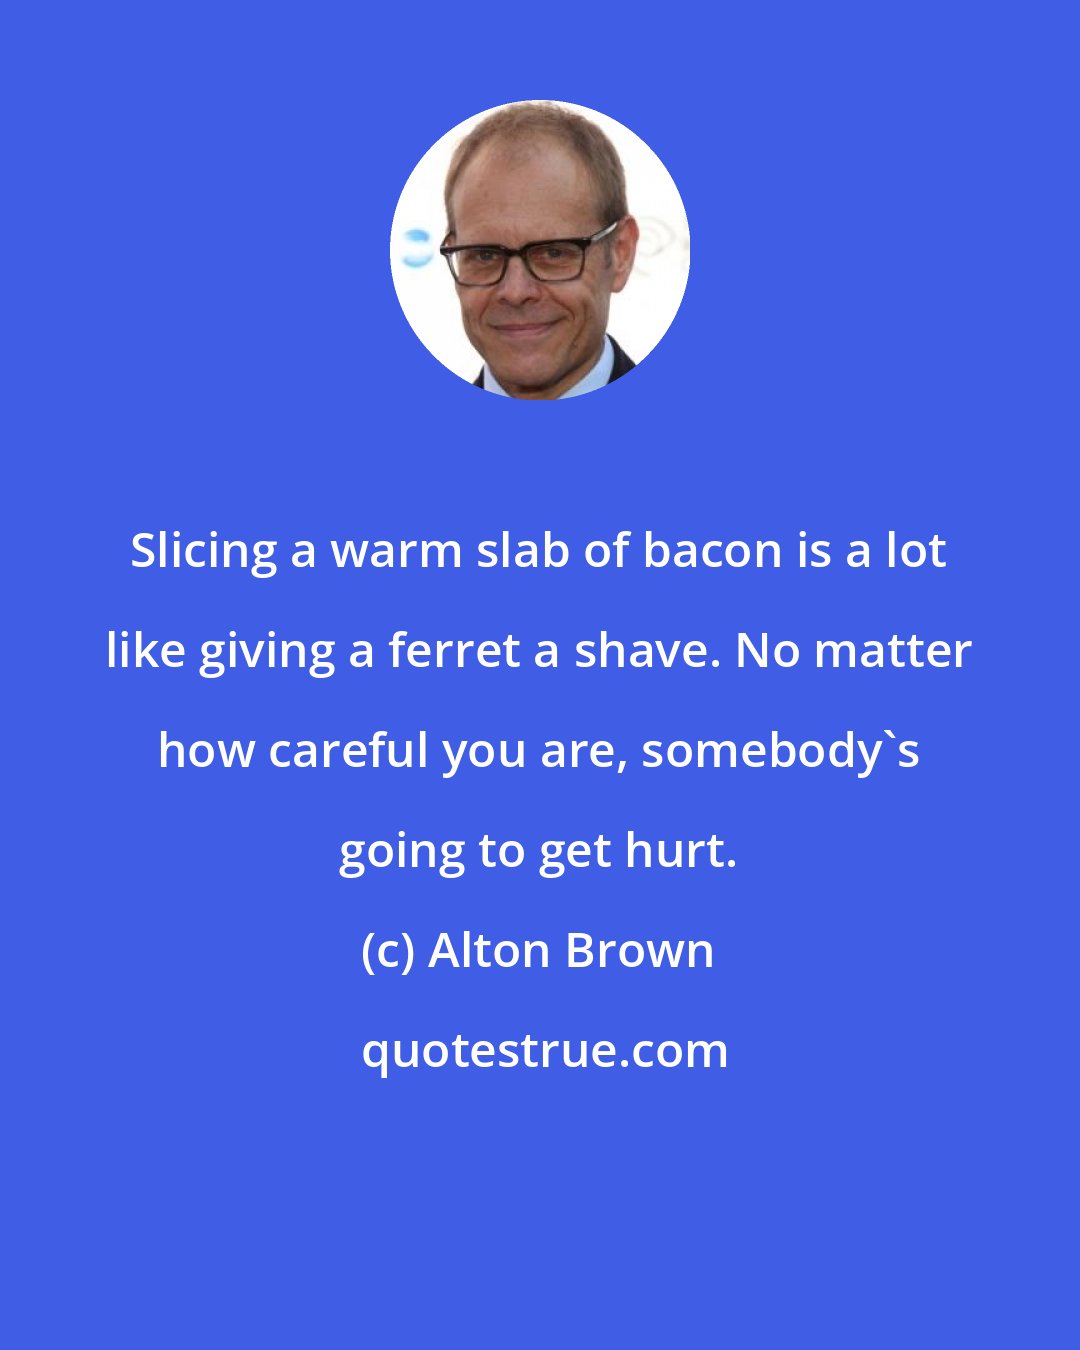 Alton Brown: Slicing a warm slab of bacon is a lot like giving a ferret a shave. No matter how careful you are, somebody's going to get hurt.